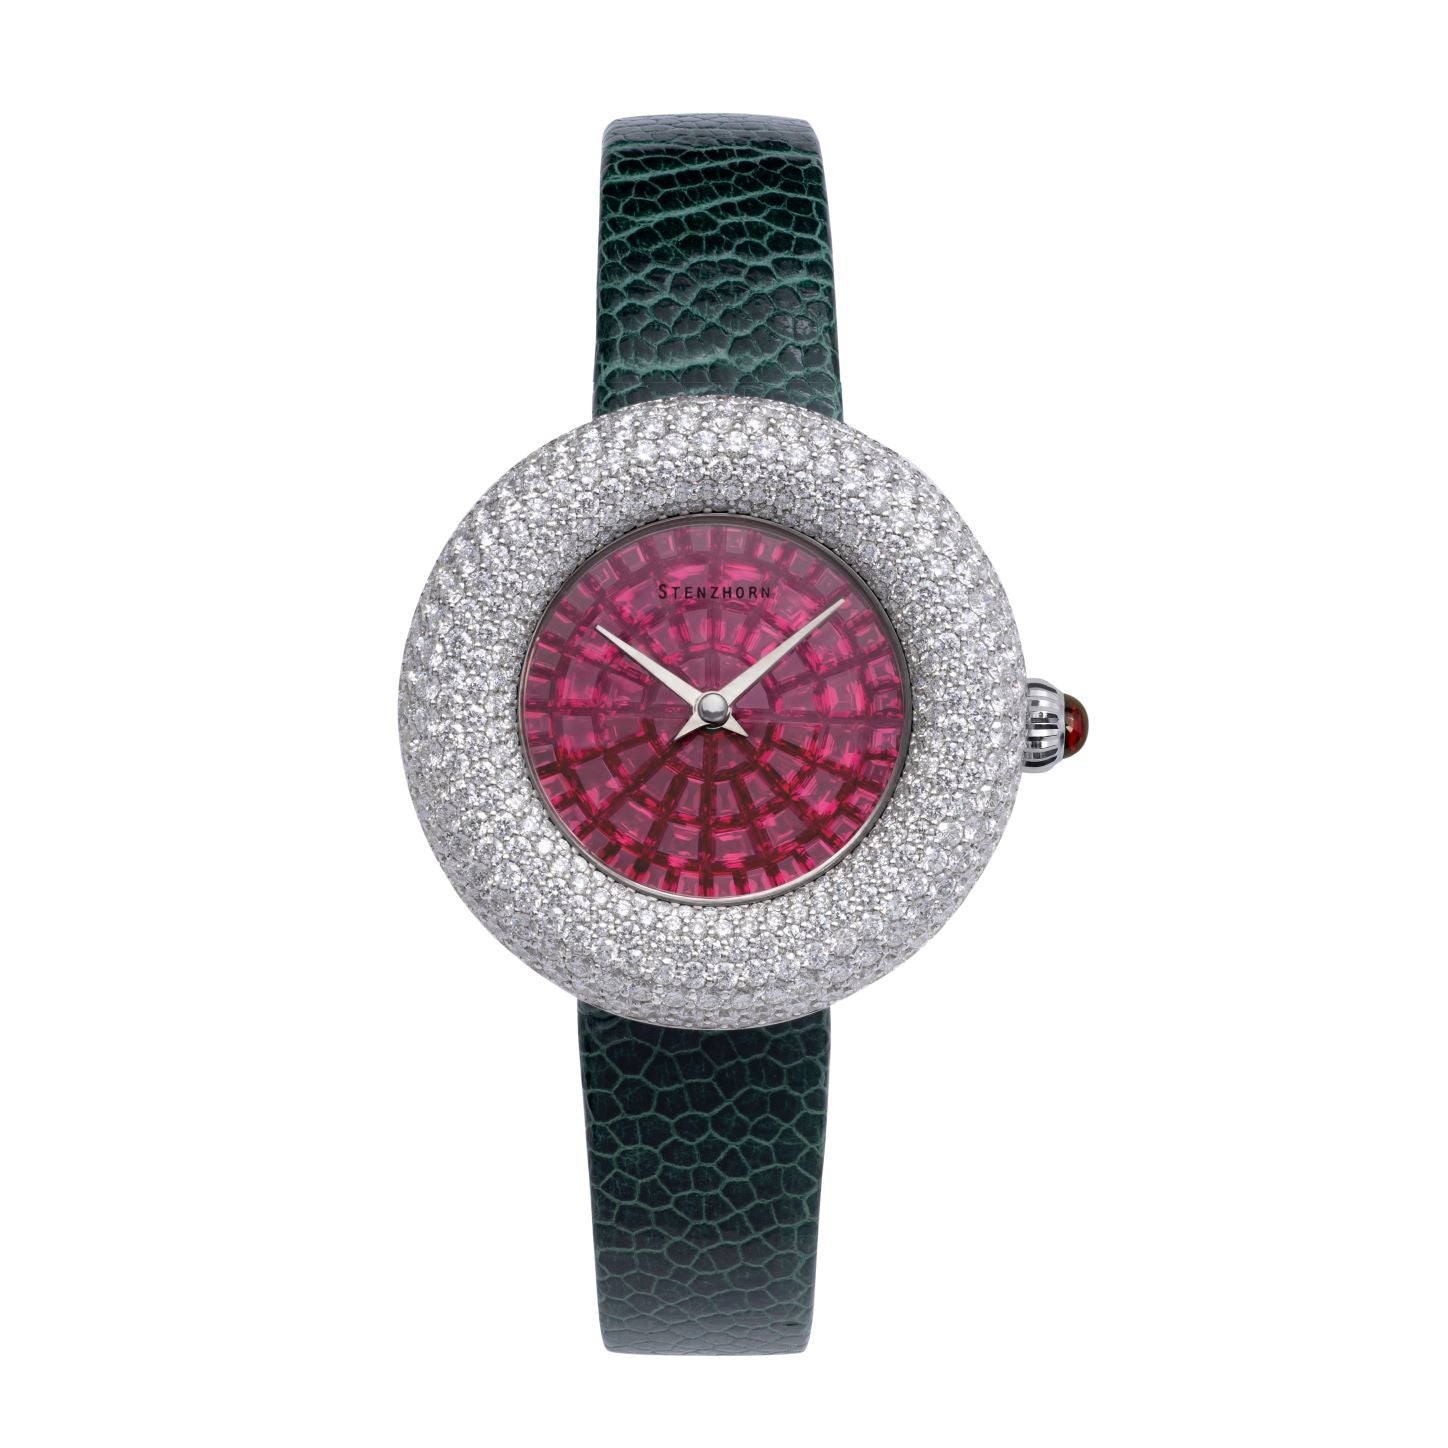 MOSAIC Watch, Ruby Fever